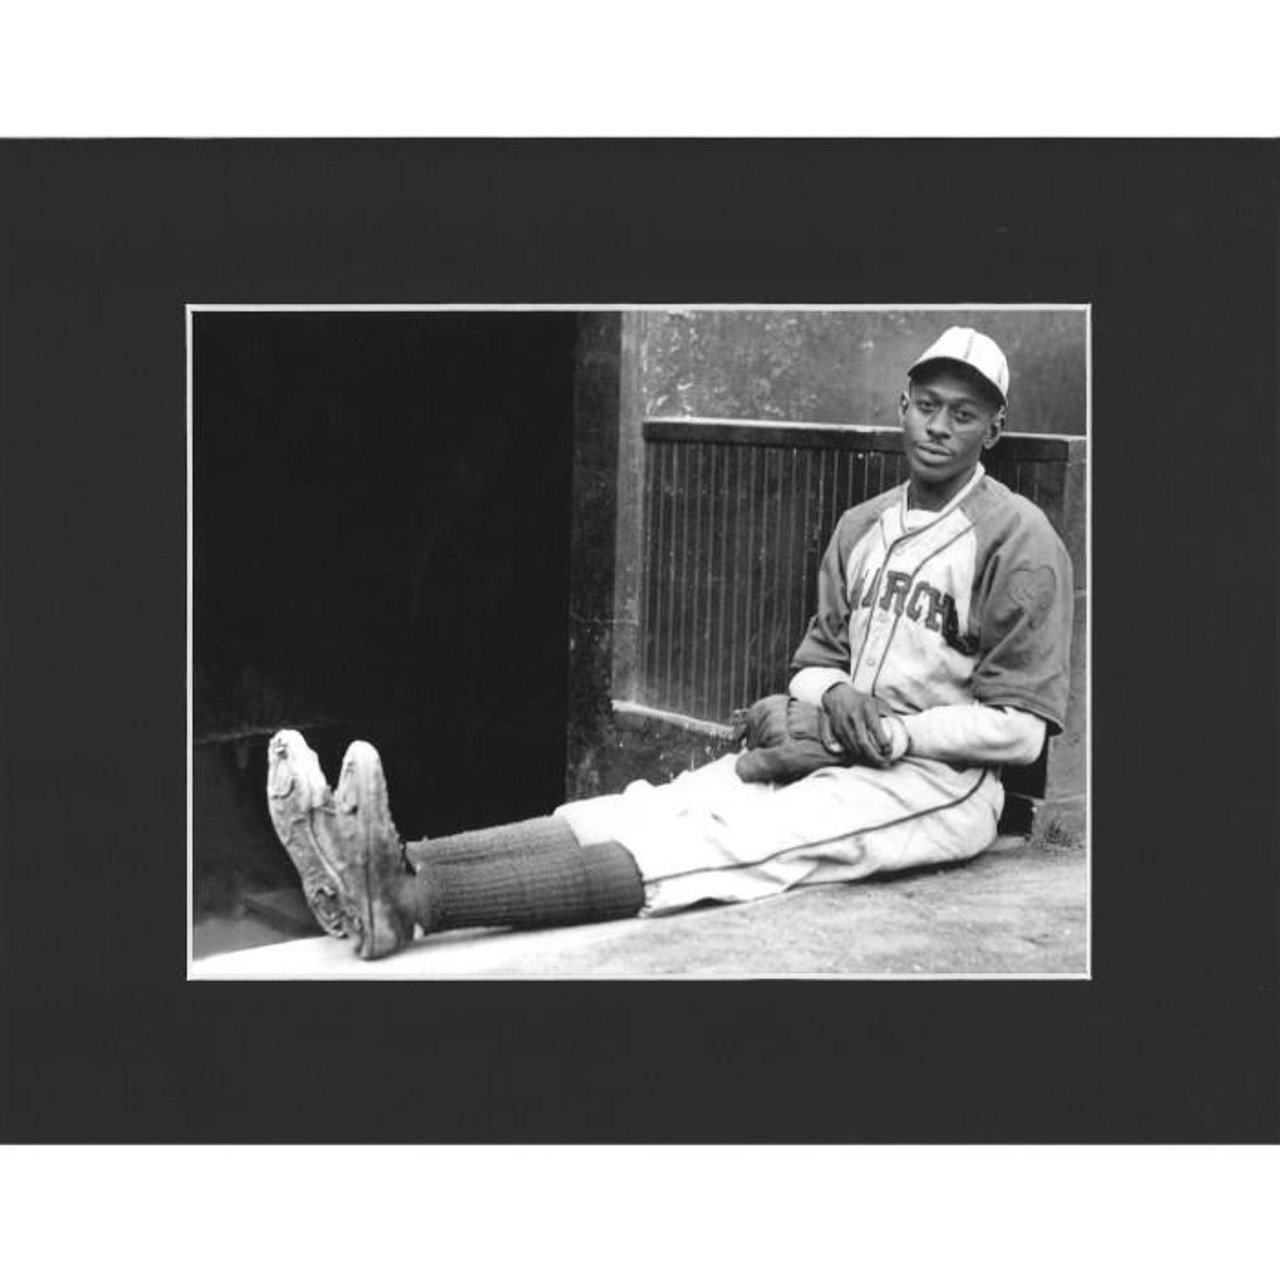 Matted 8x10 Photo- Larry Doby & Satchel Paige